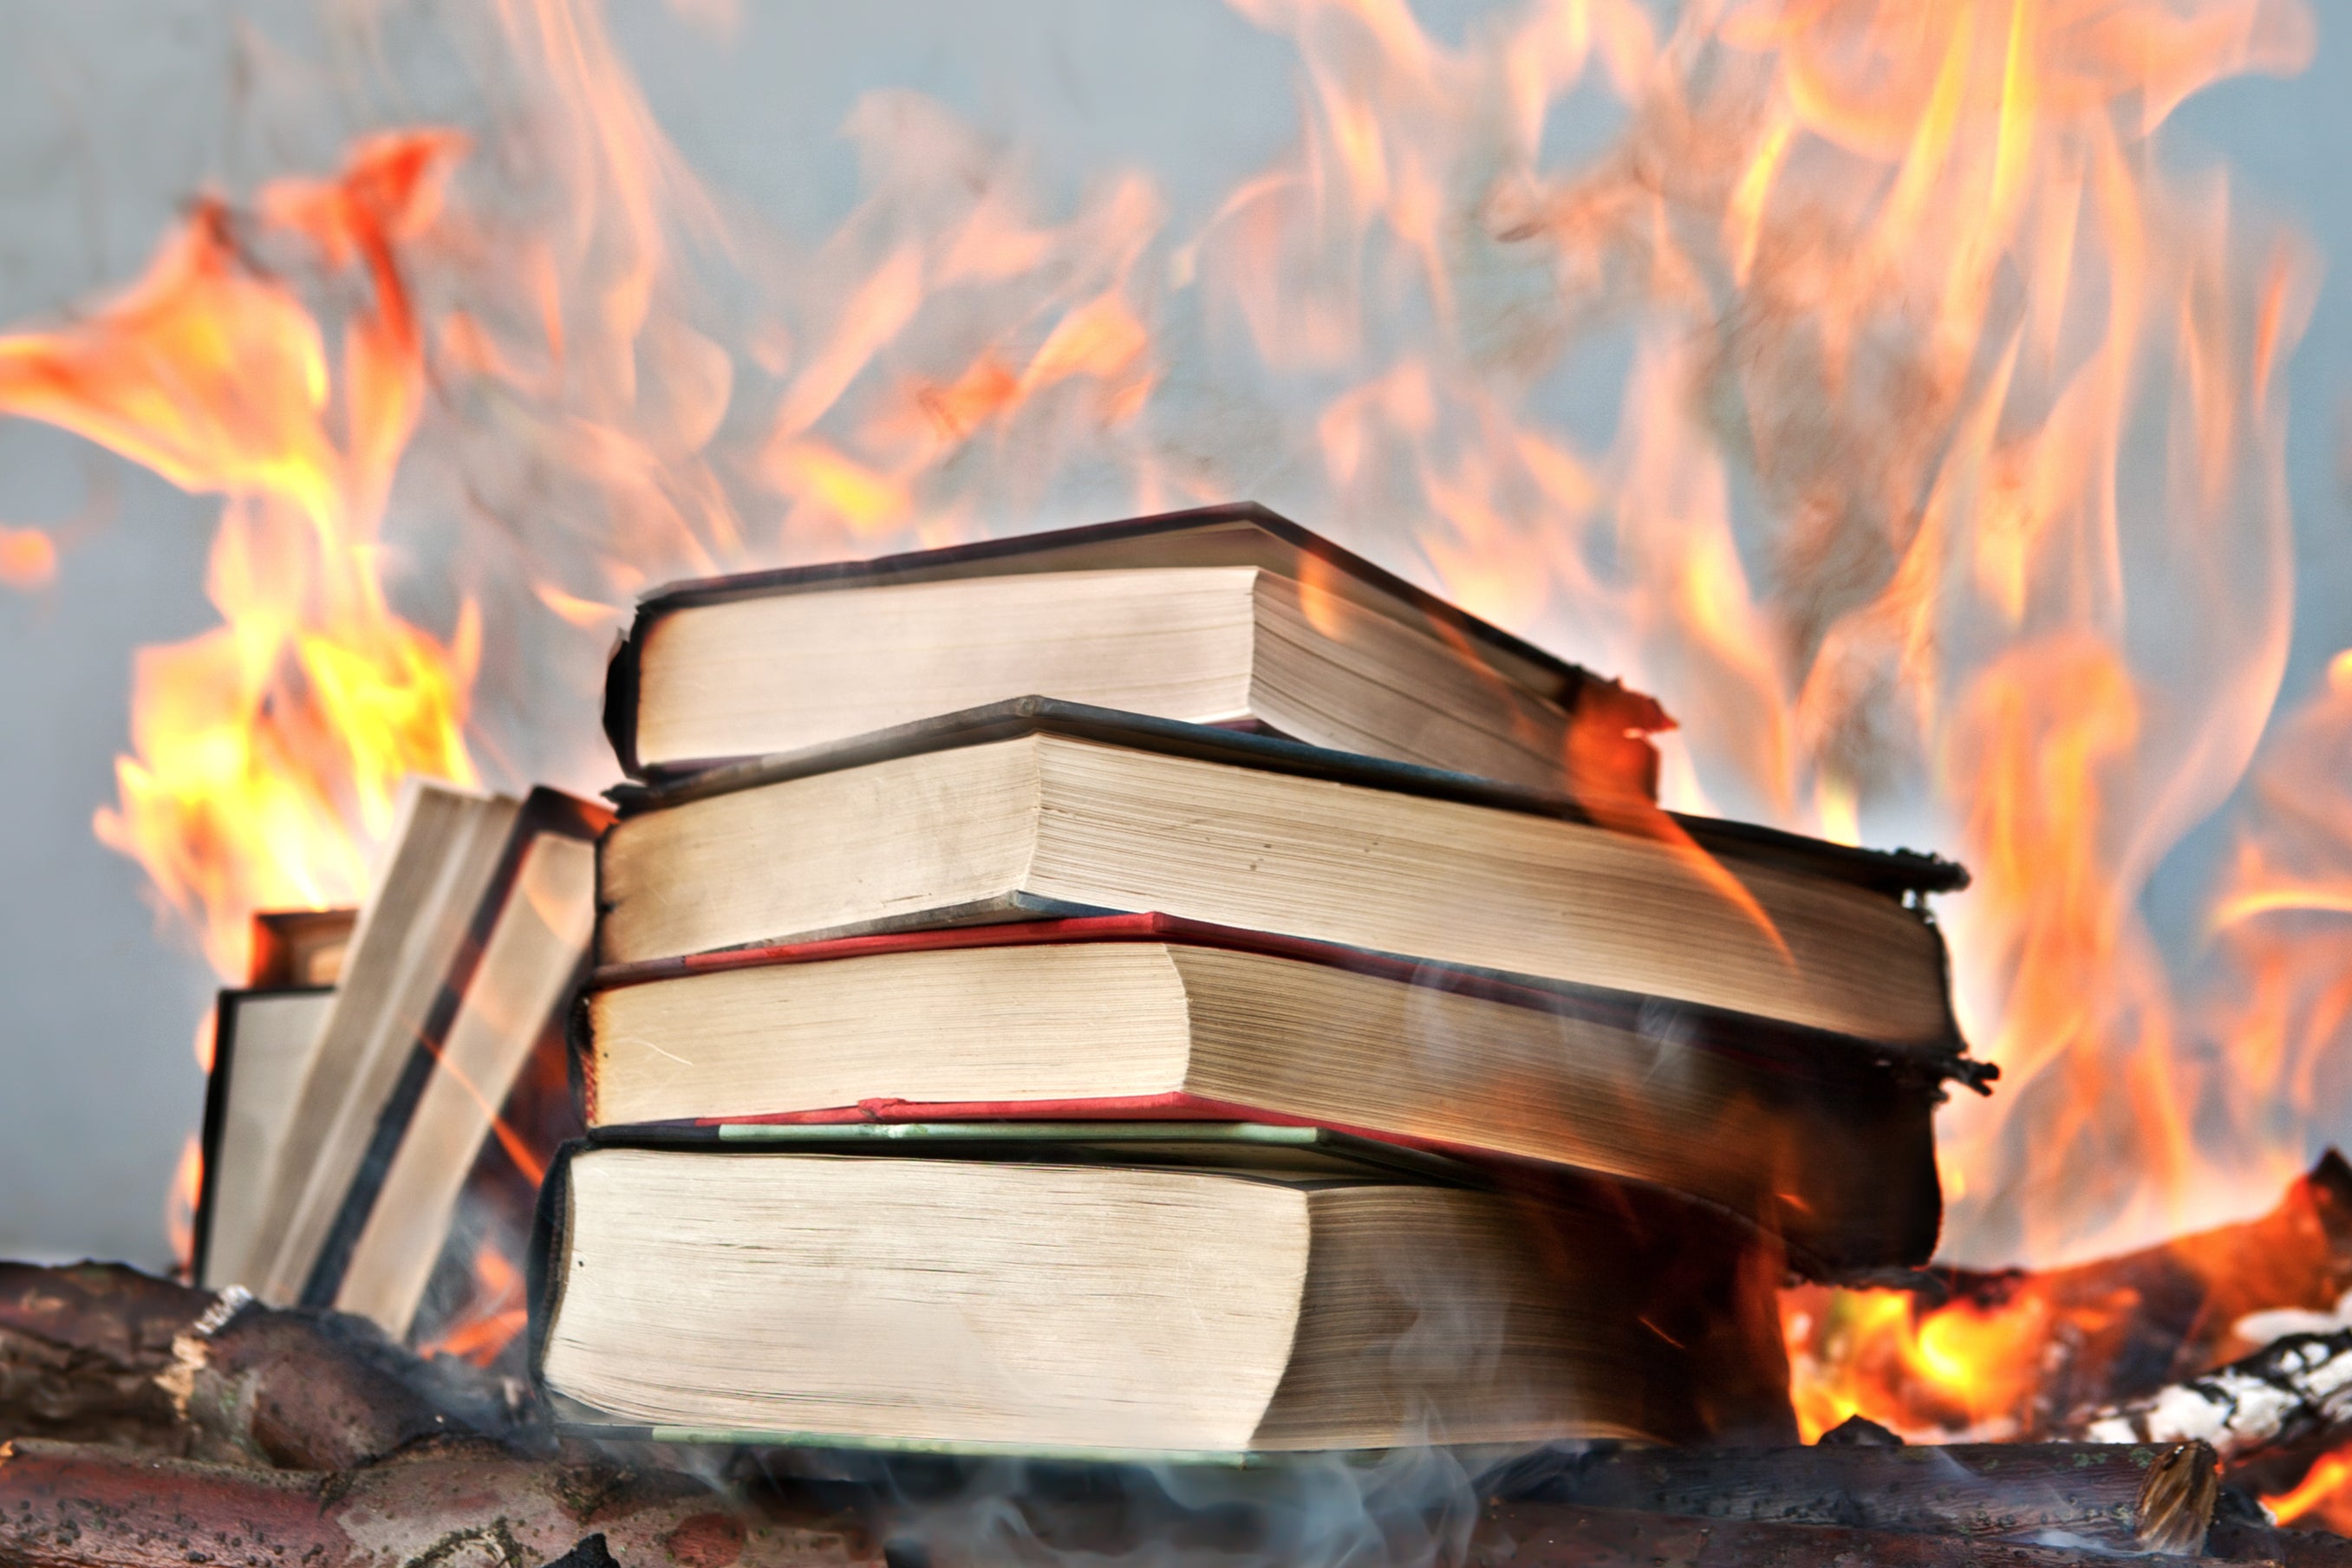 ‘We’re worried about the increasing temperature of culture wars, together with rising parental concern around what children are reading in school libraries’